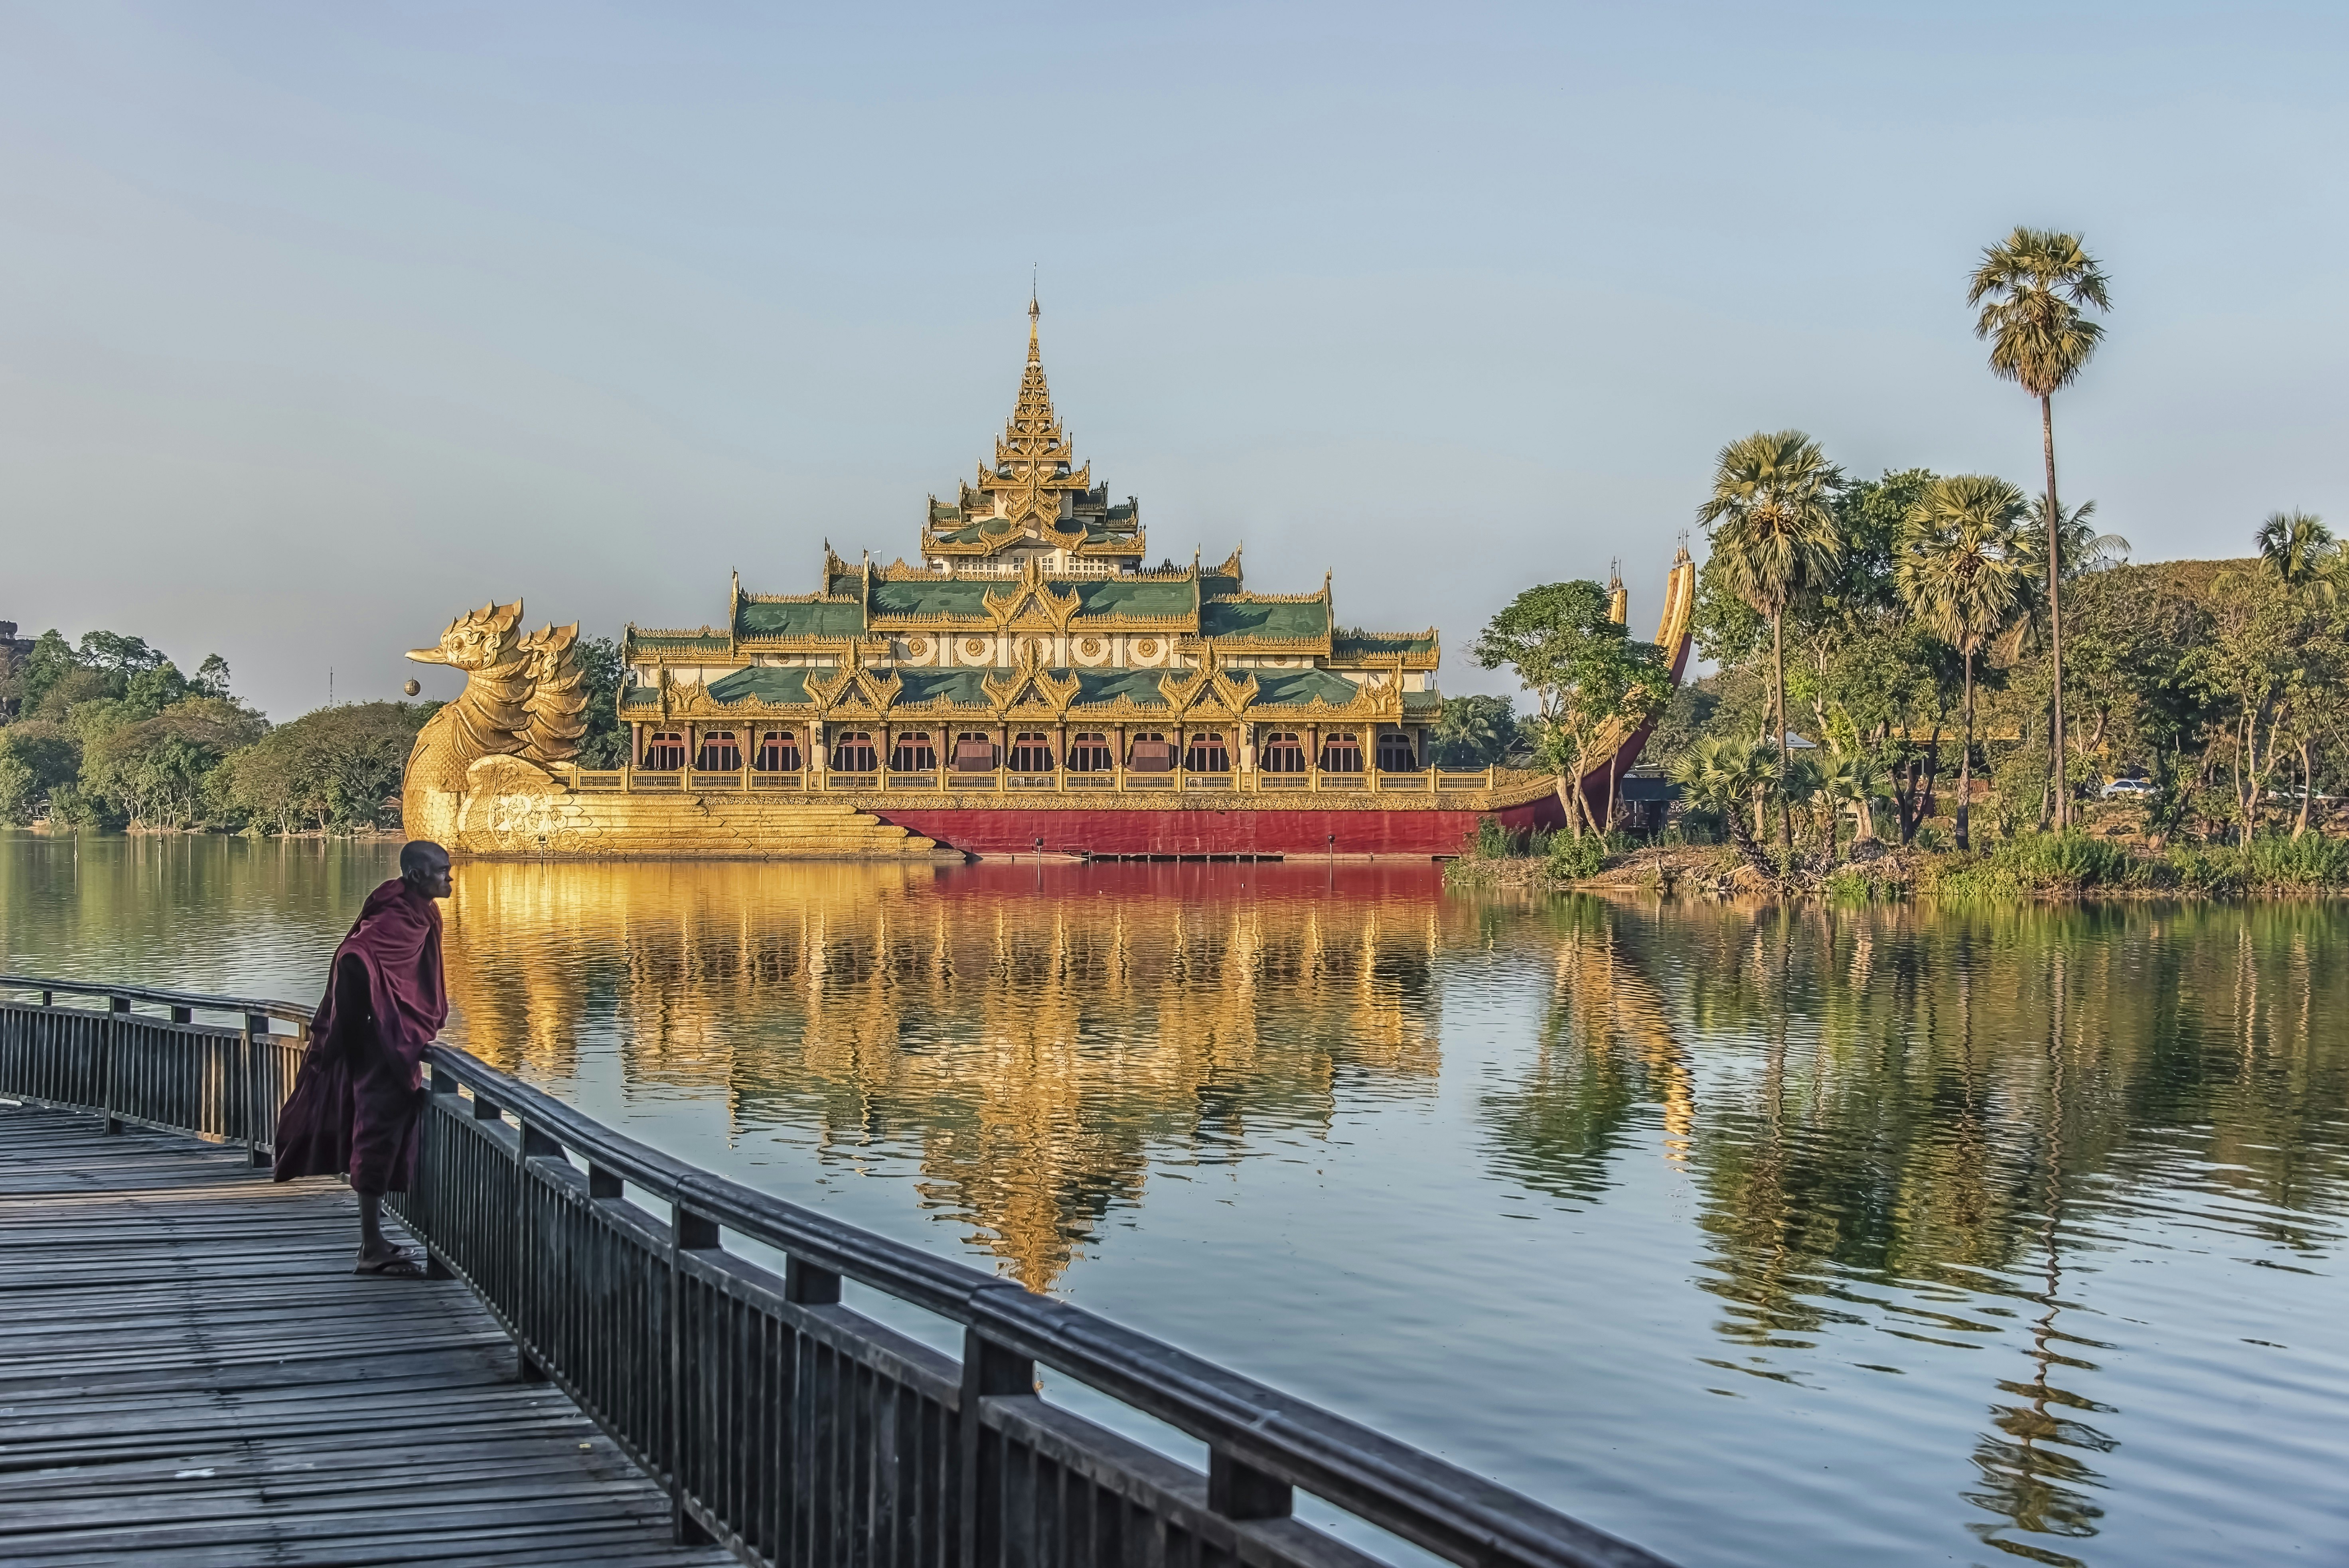 A monk, dressed in a red robe, stands on the boardwalk at Kandawgyi Lake looking out over the water. In the background, the Karaweik Palace looms large over the lake.